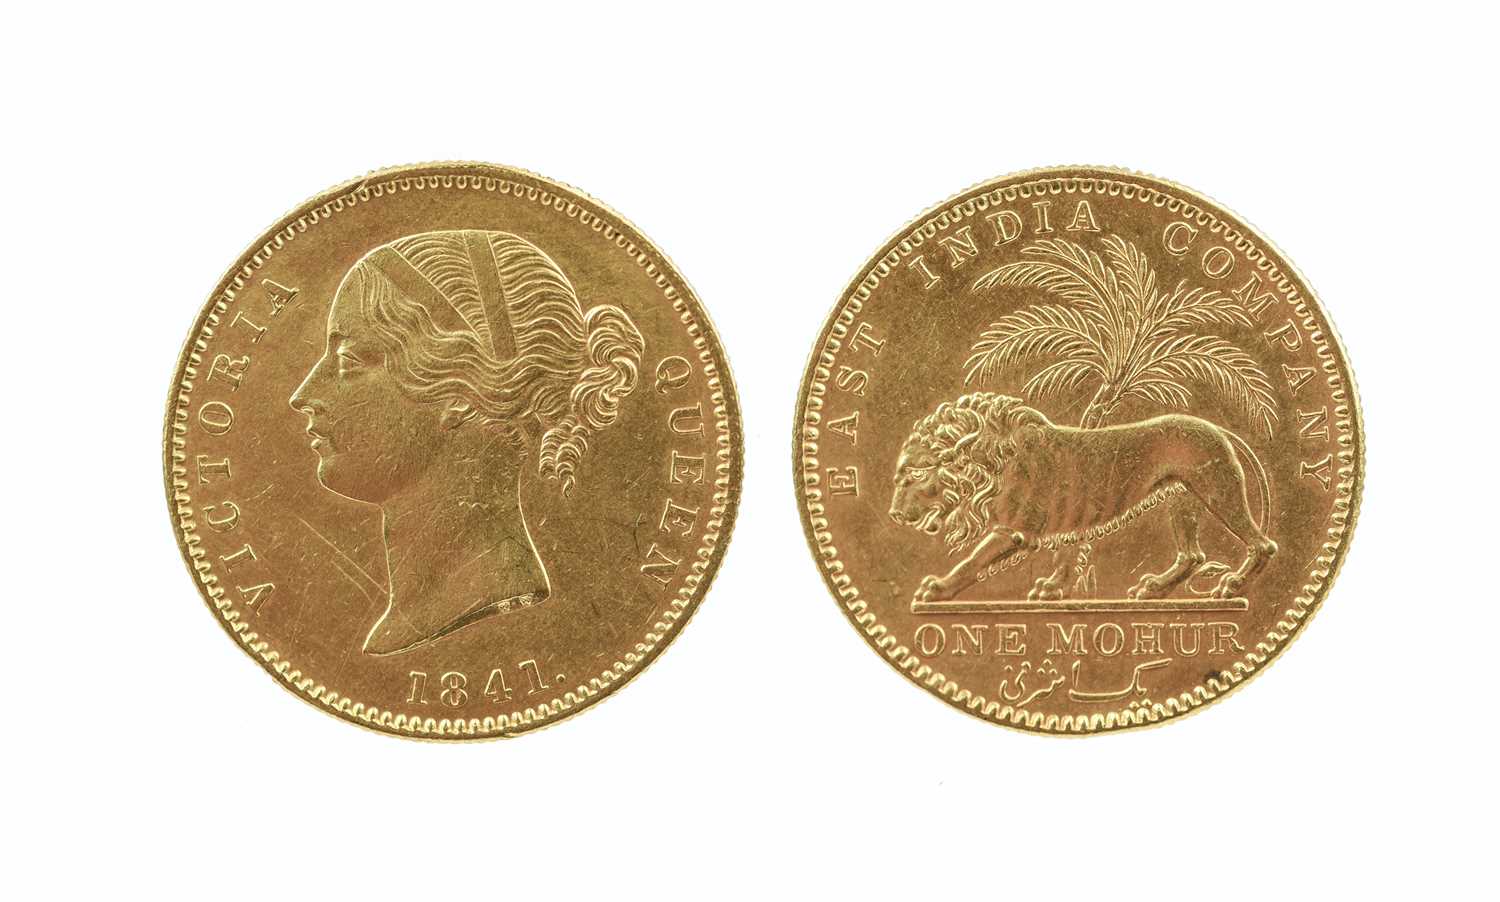 British India: Victoria, gold mohur, 1841, type II, obverse legend divided, large legend and date